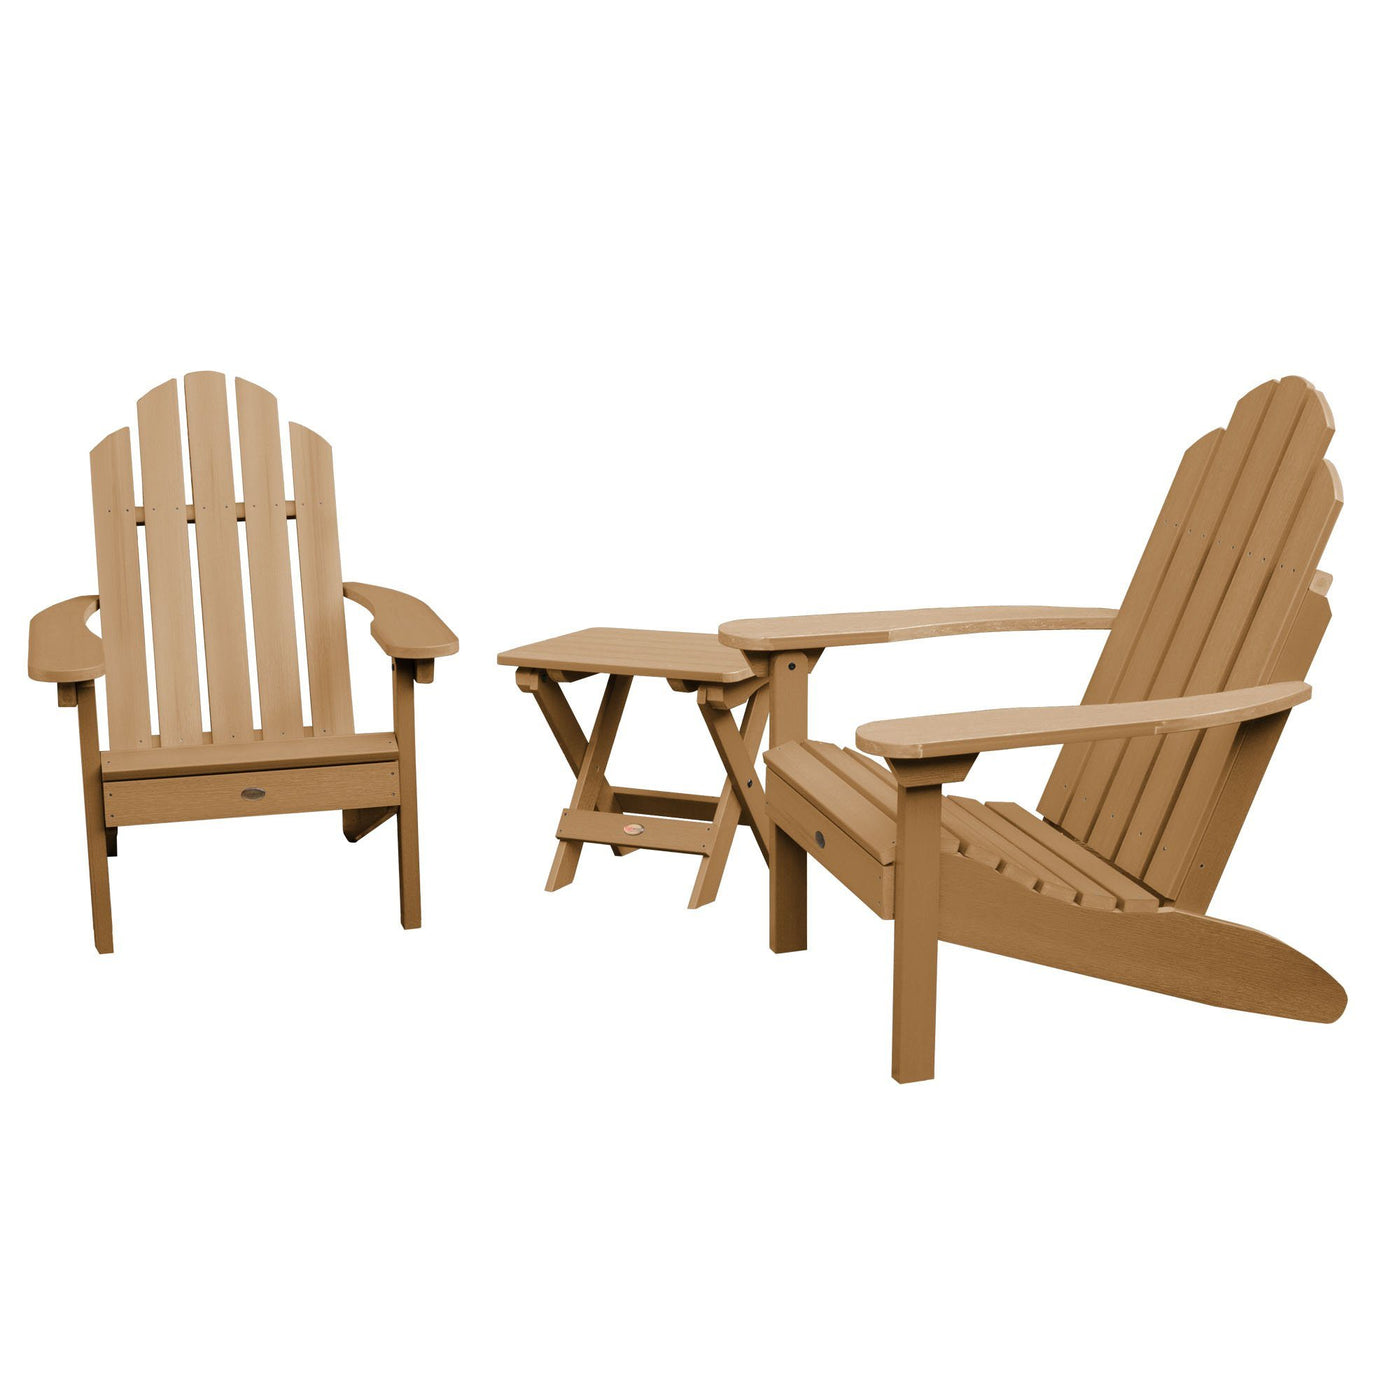 2 Classic Westport Adirondack Chairs with 1 Adirondack Folding Side Table Highwood USA Toffee 